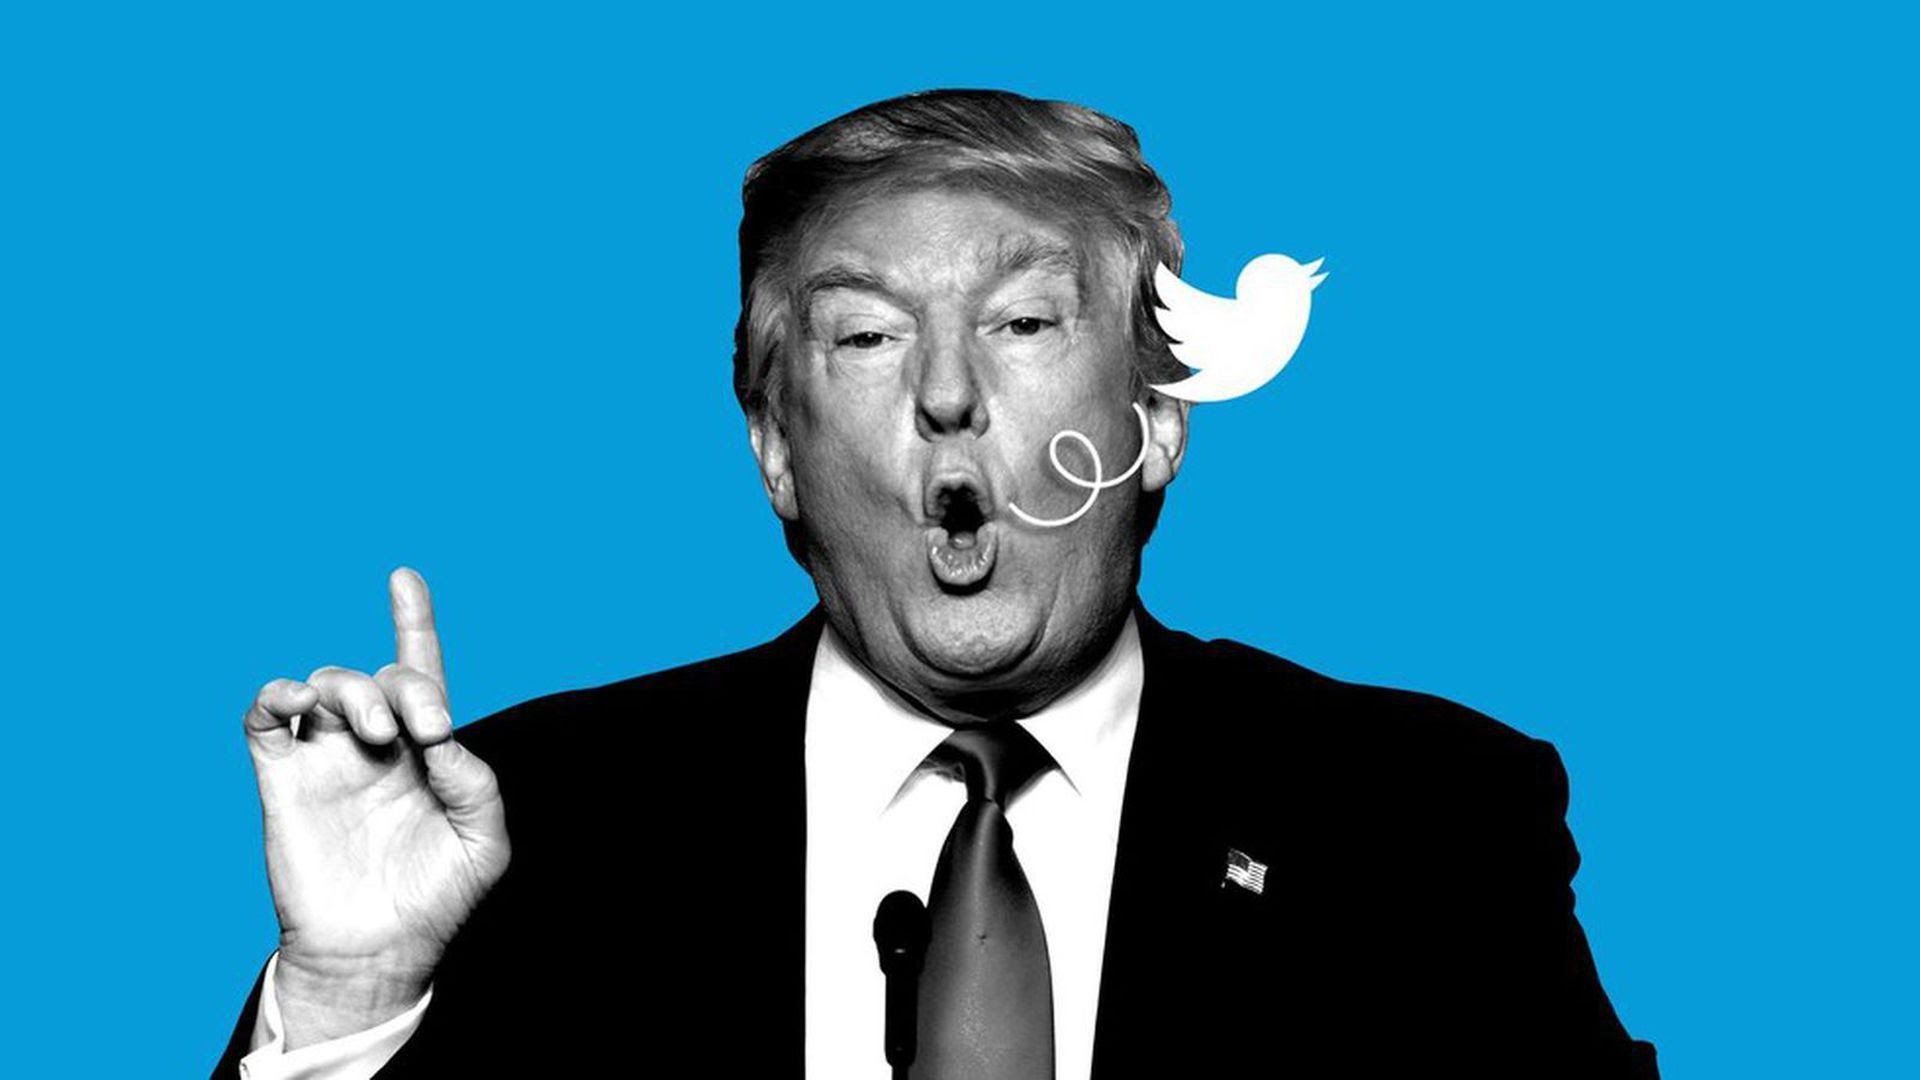 illustration of President Trump opening his mouth and the Twitter bird logo flies out